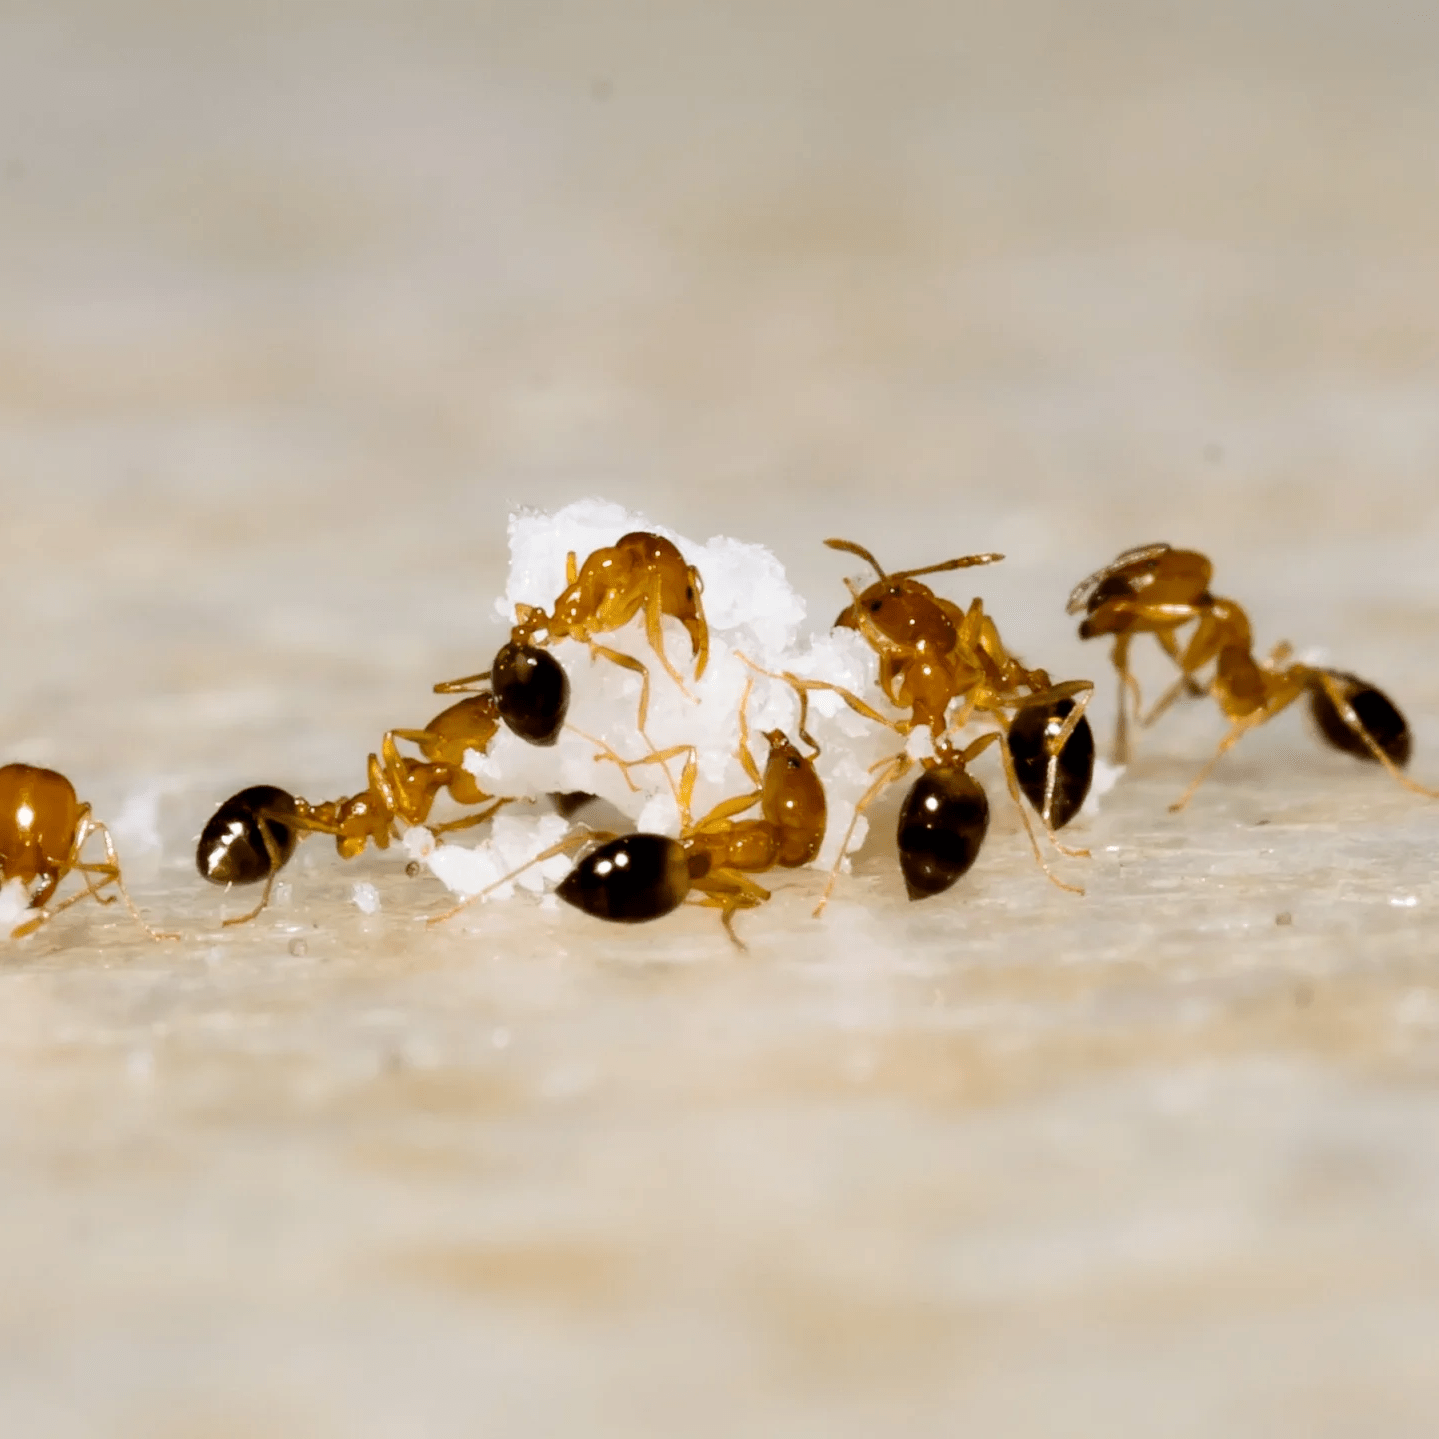 Six red and black ants on a light beige floor crawling on a pest control crumb.